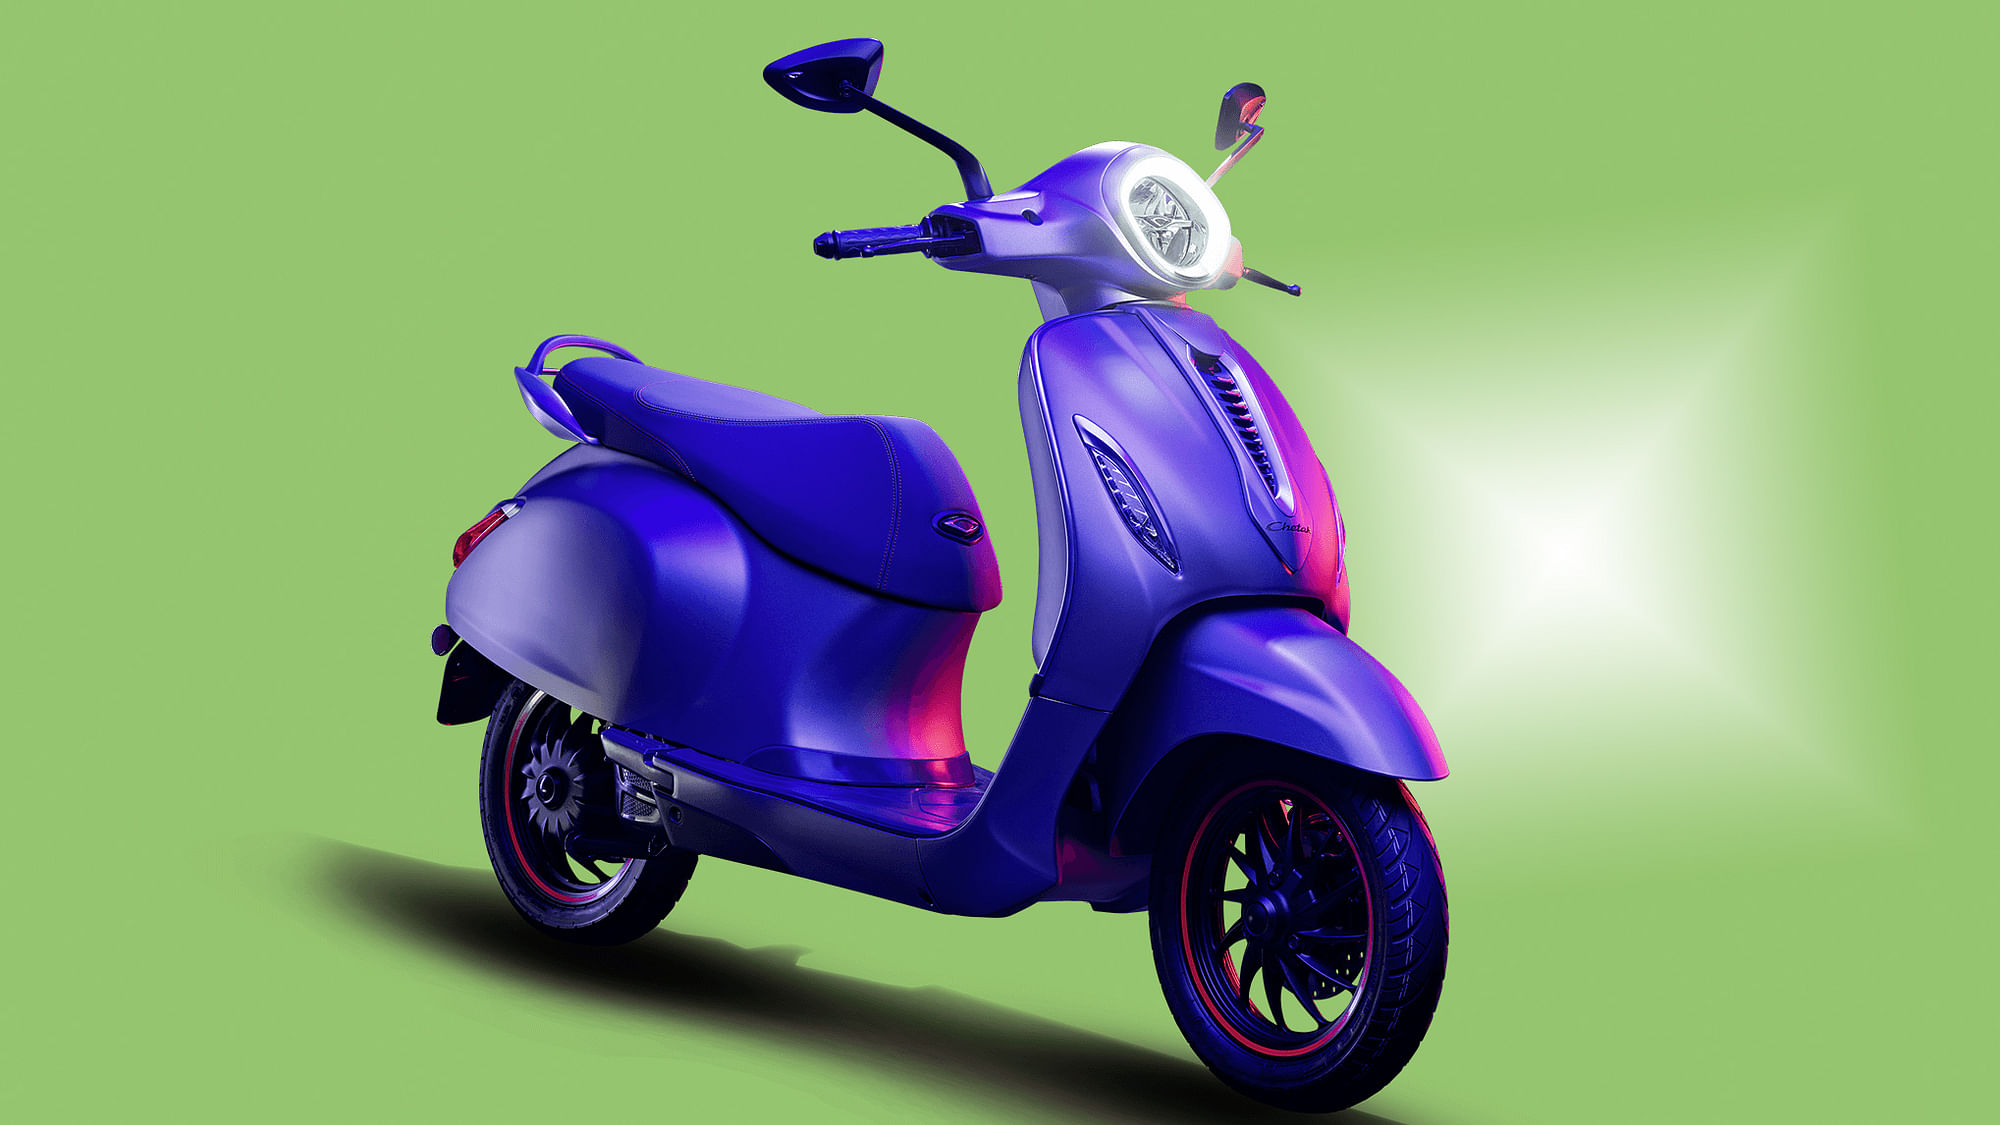 Do you like how this scooter looks?